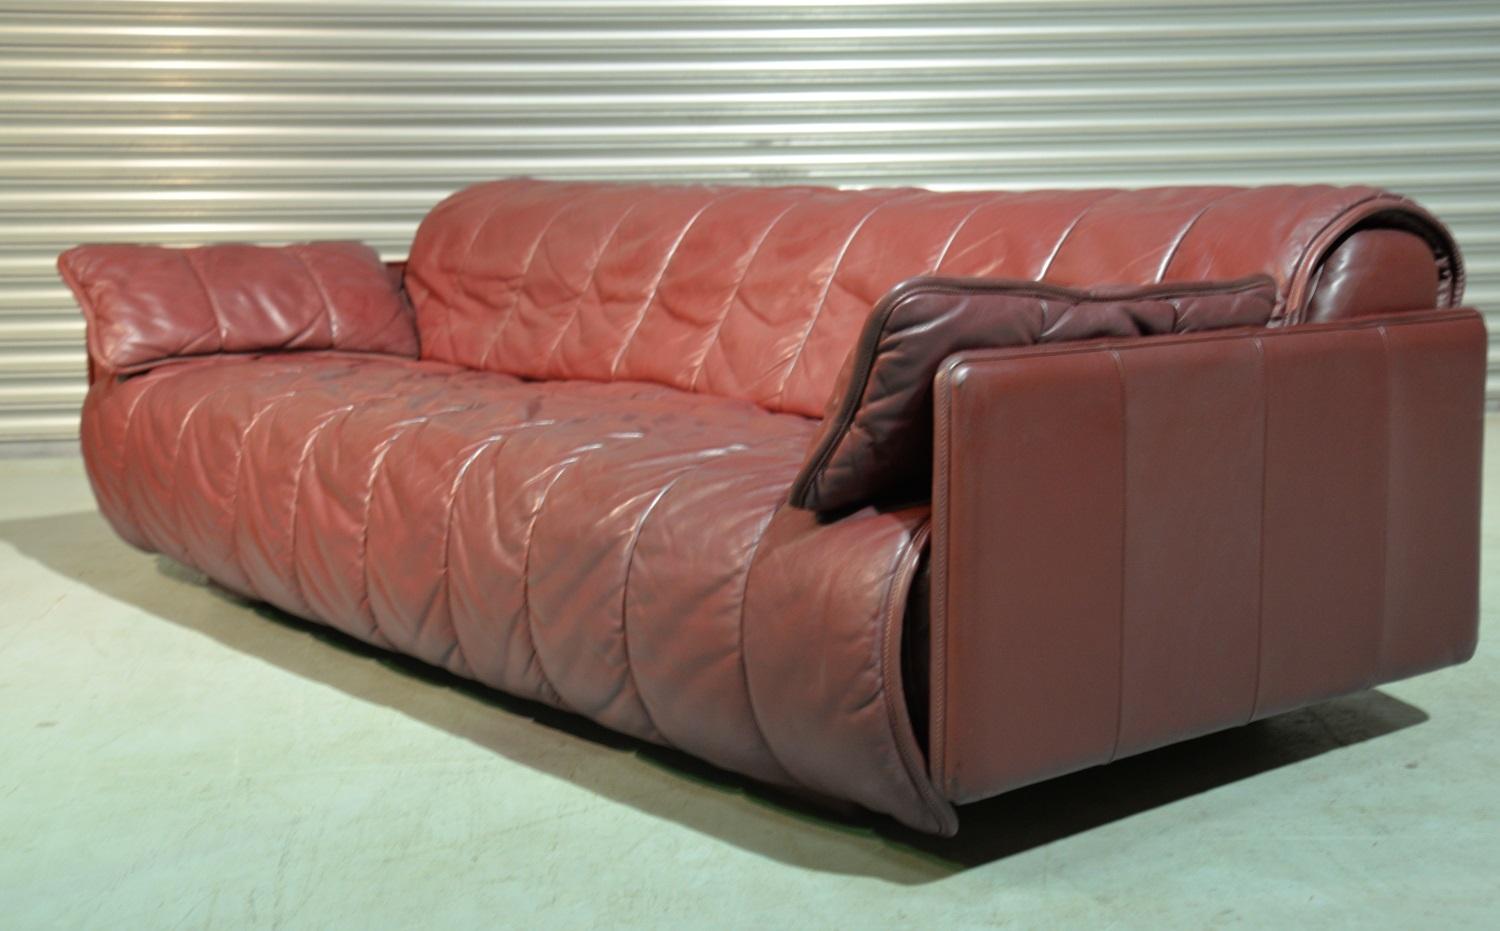 Vintage De Sede Patchwork Leather Sofa or Daybed, Switzerland, 1970s For Sale 3